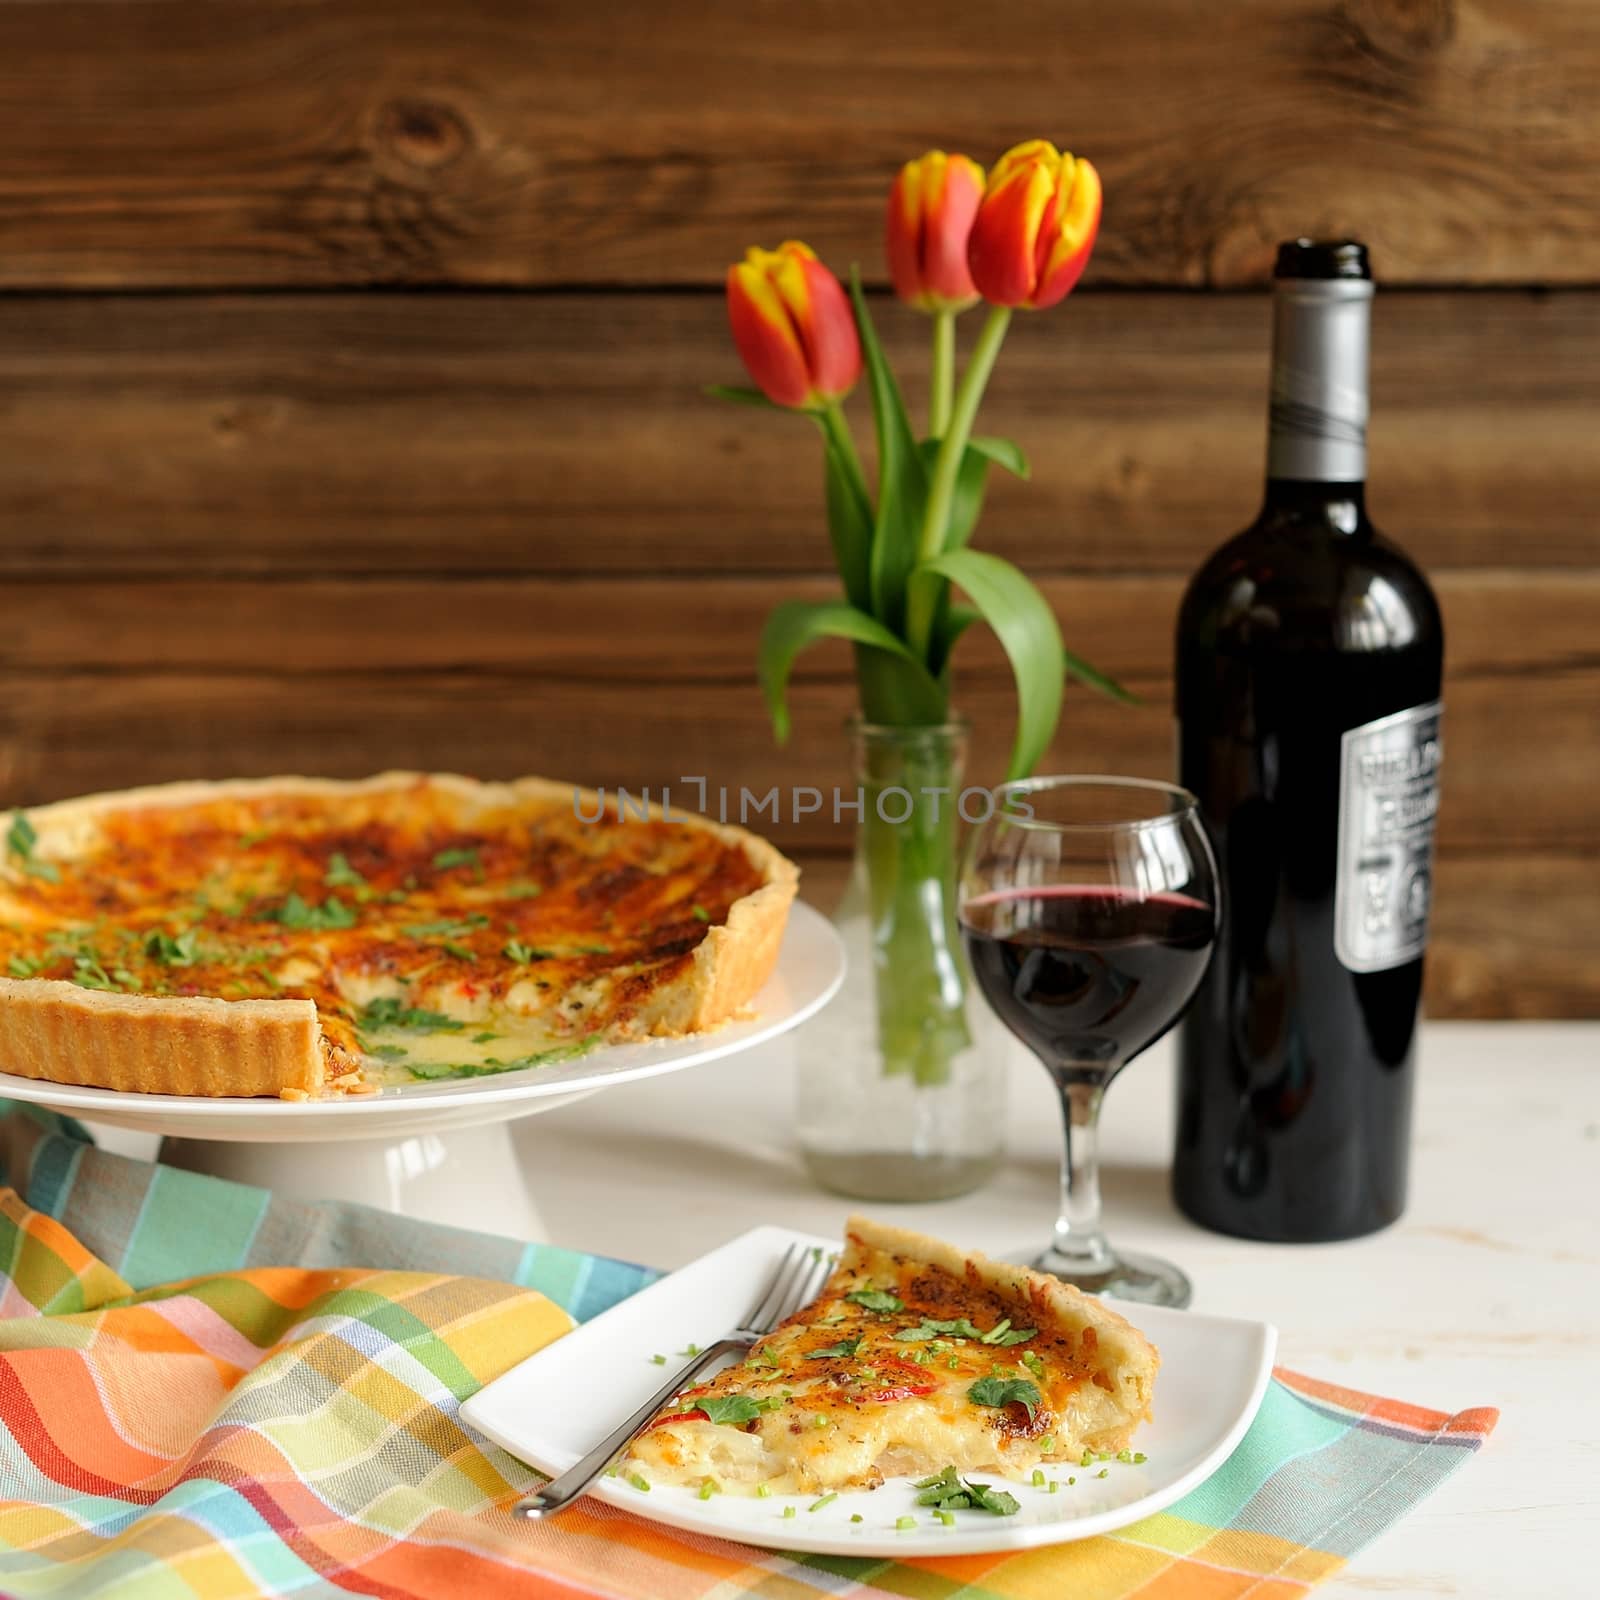 Cheese tart with red wine and red tulips on wooden background square